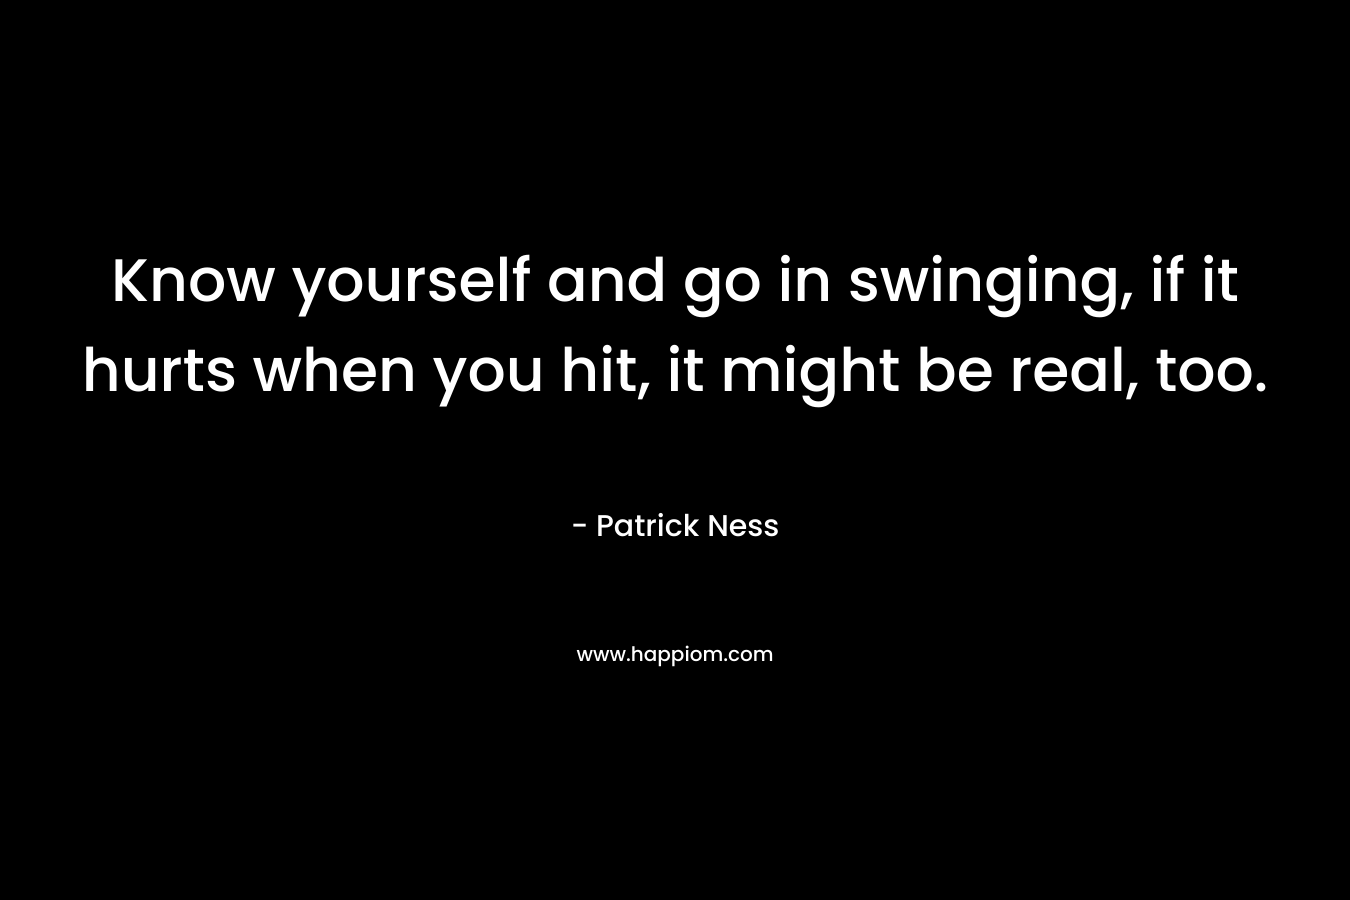 Know yourself and go in swinging, if it hurts when you hit, it might be real, too. – Patrick Ness